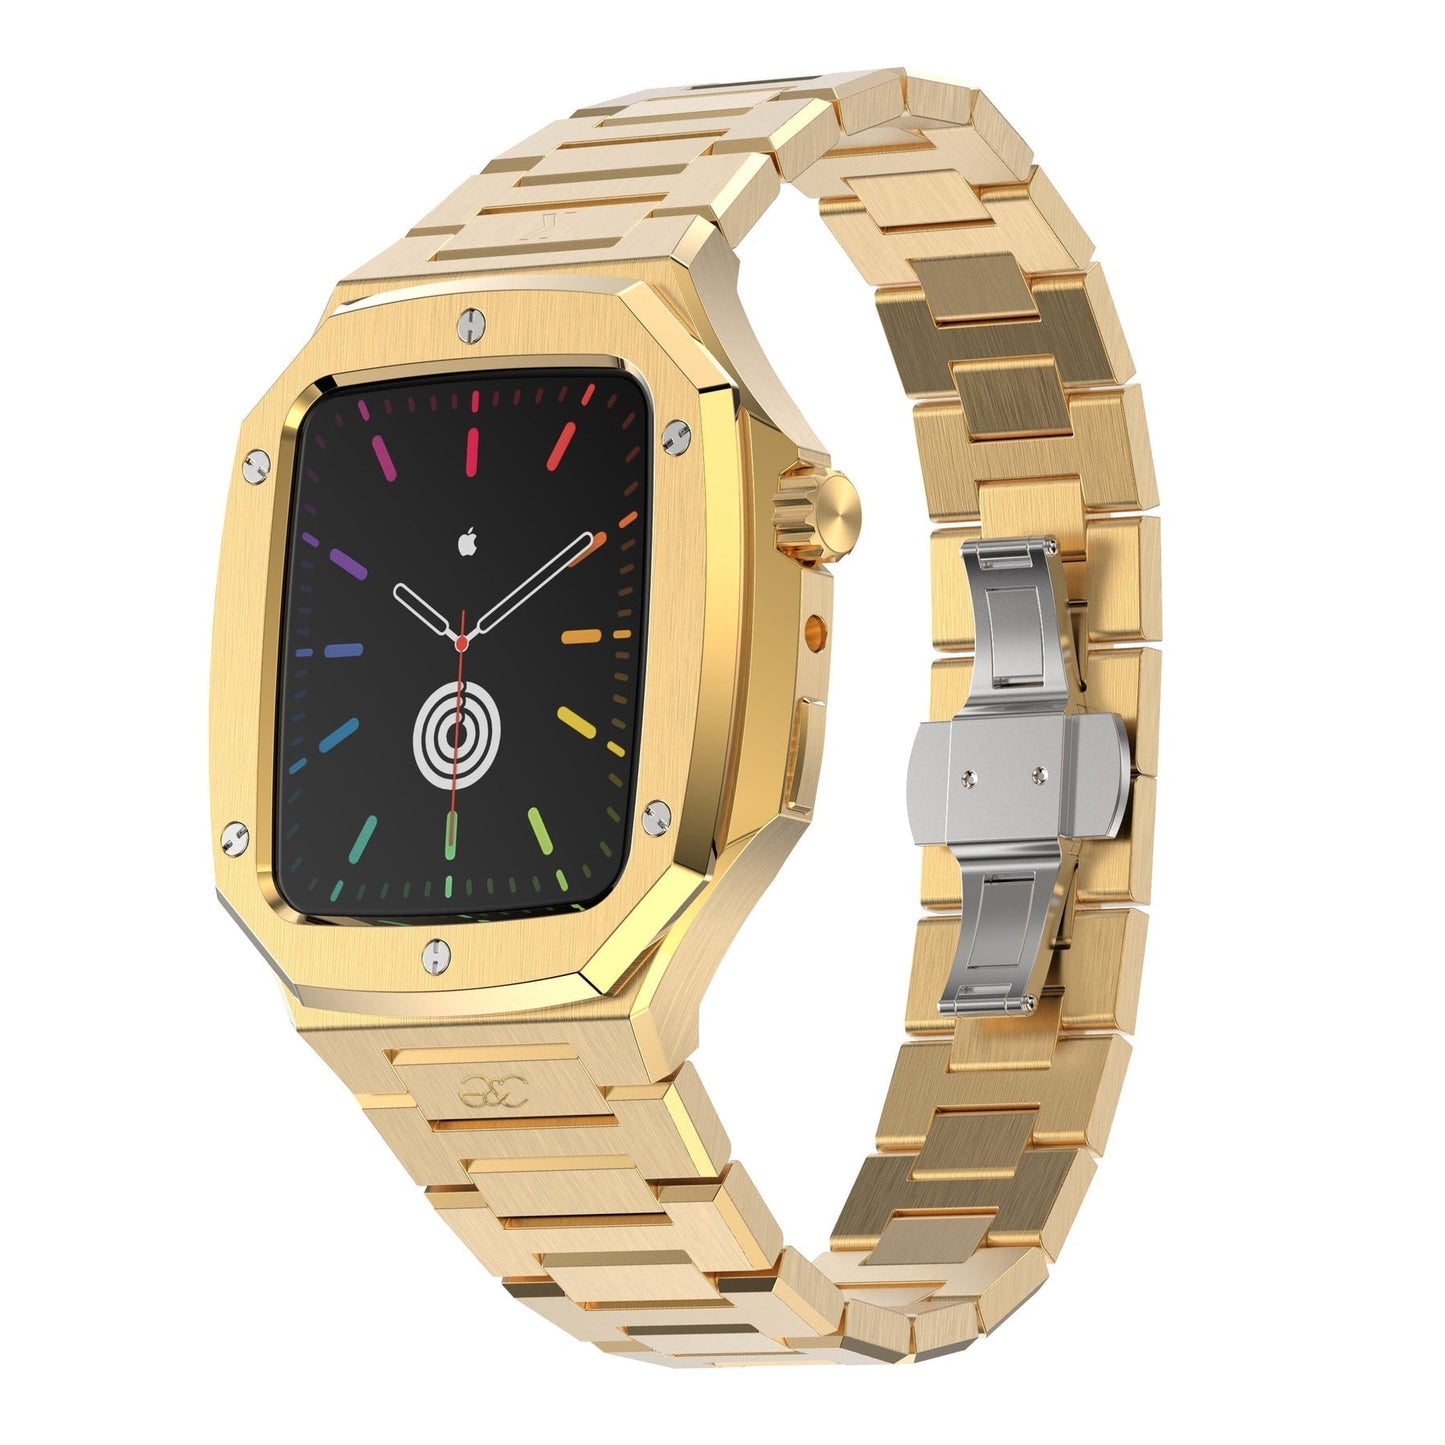 Apple Watch Gold Steel case & band - Gold & Cherry